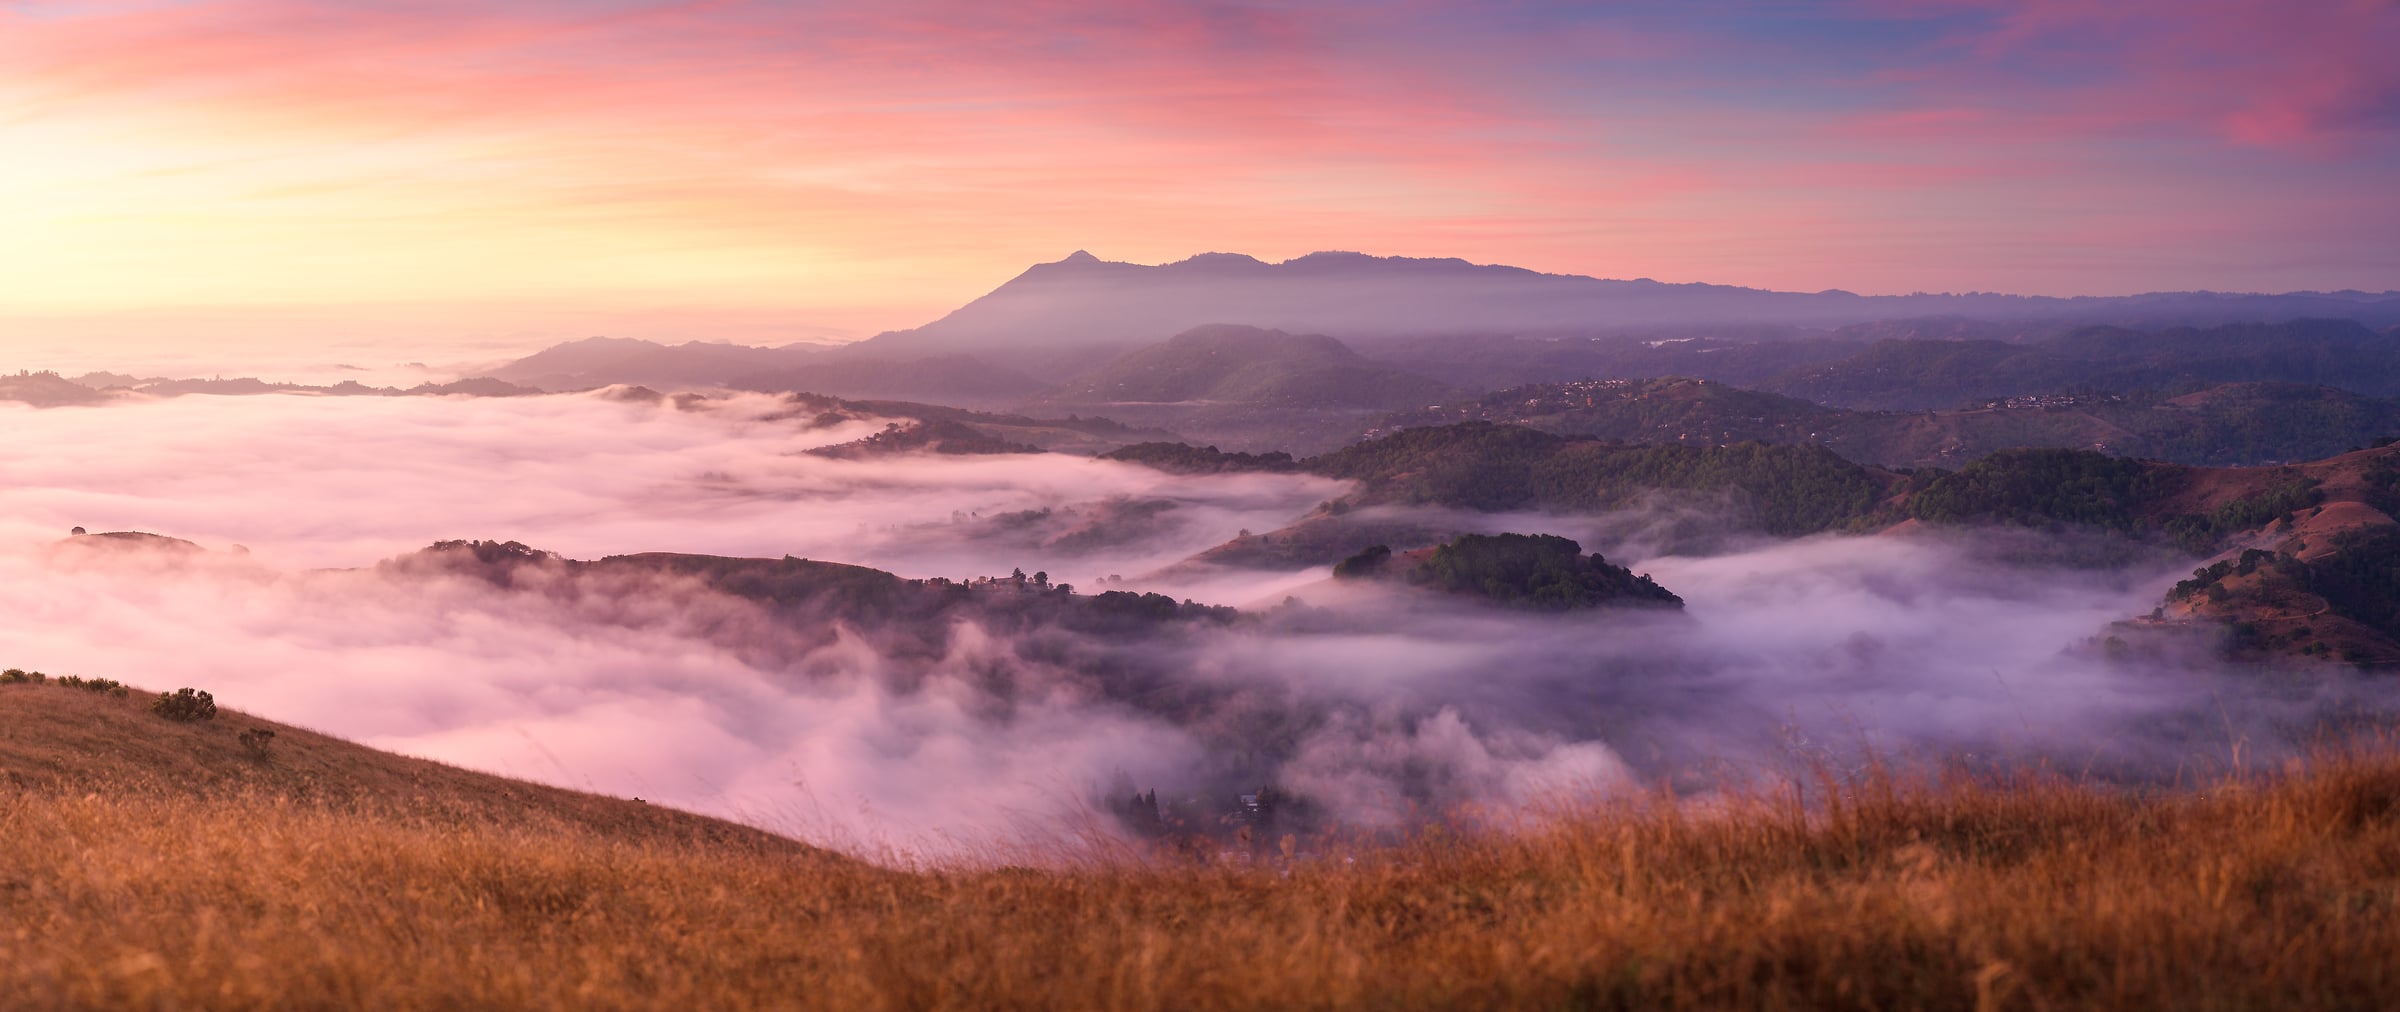 180 megapixels! A very high resolution, large-format VAST photo print of a mountain landscape with fog in the valleys at sunset with a pastel-colored sky; landscape photograph created by Jeff Lewis in Marin County, California.